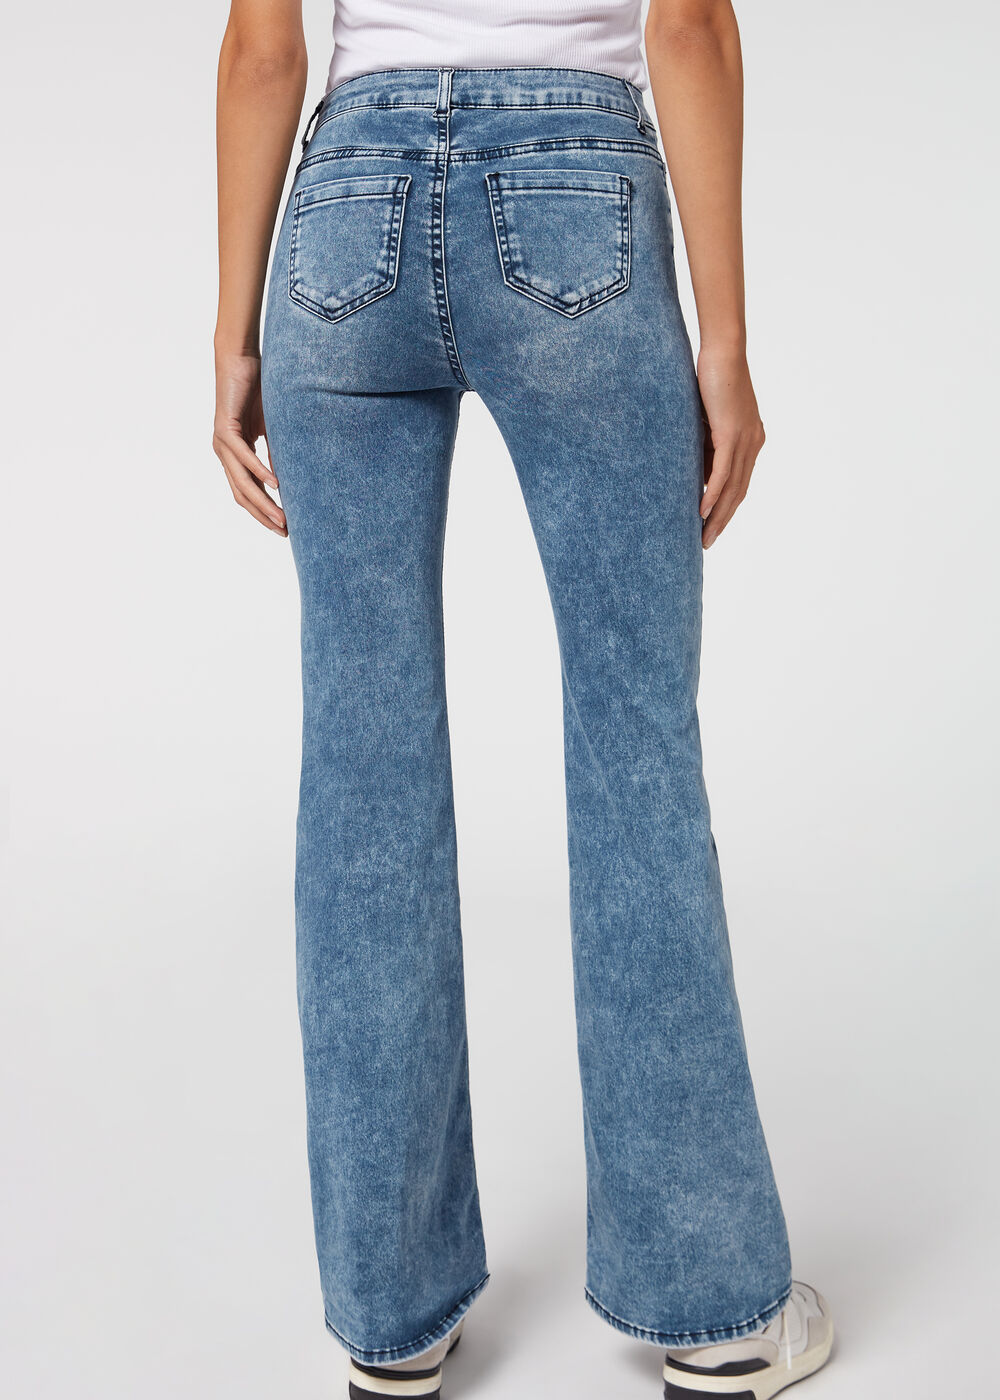 Flared Jeans - Calzedonia